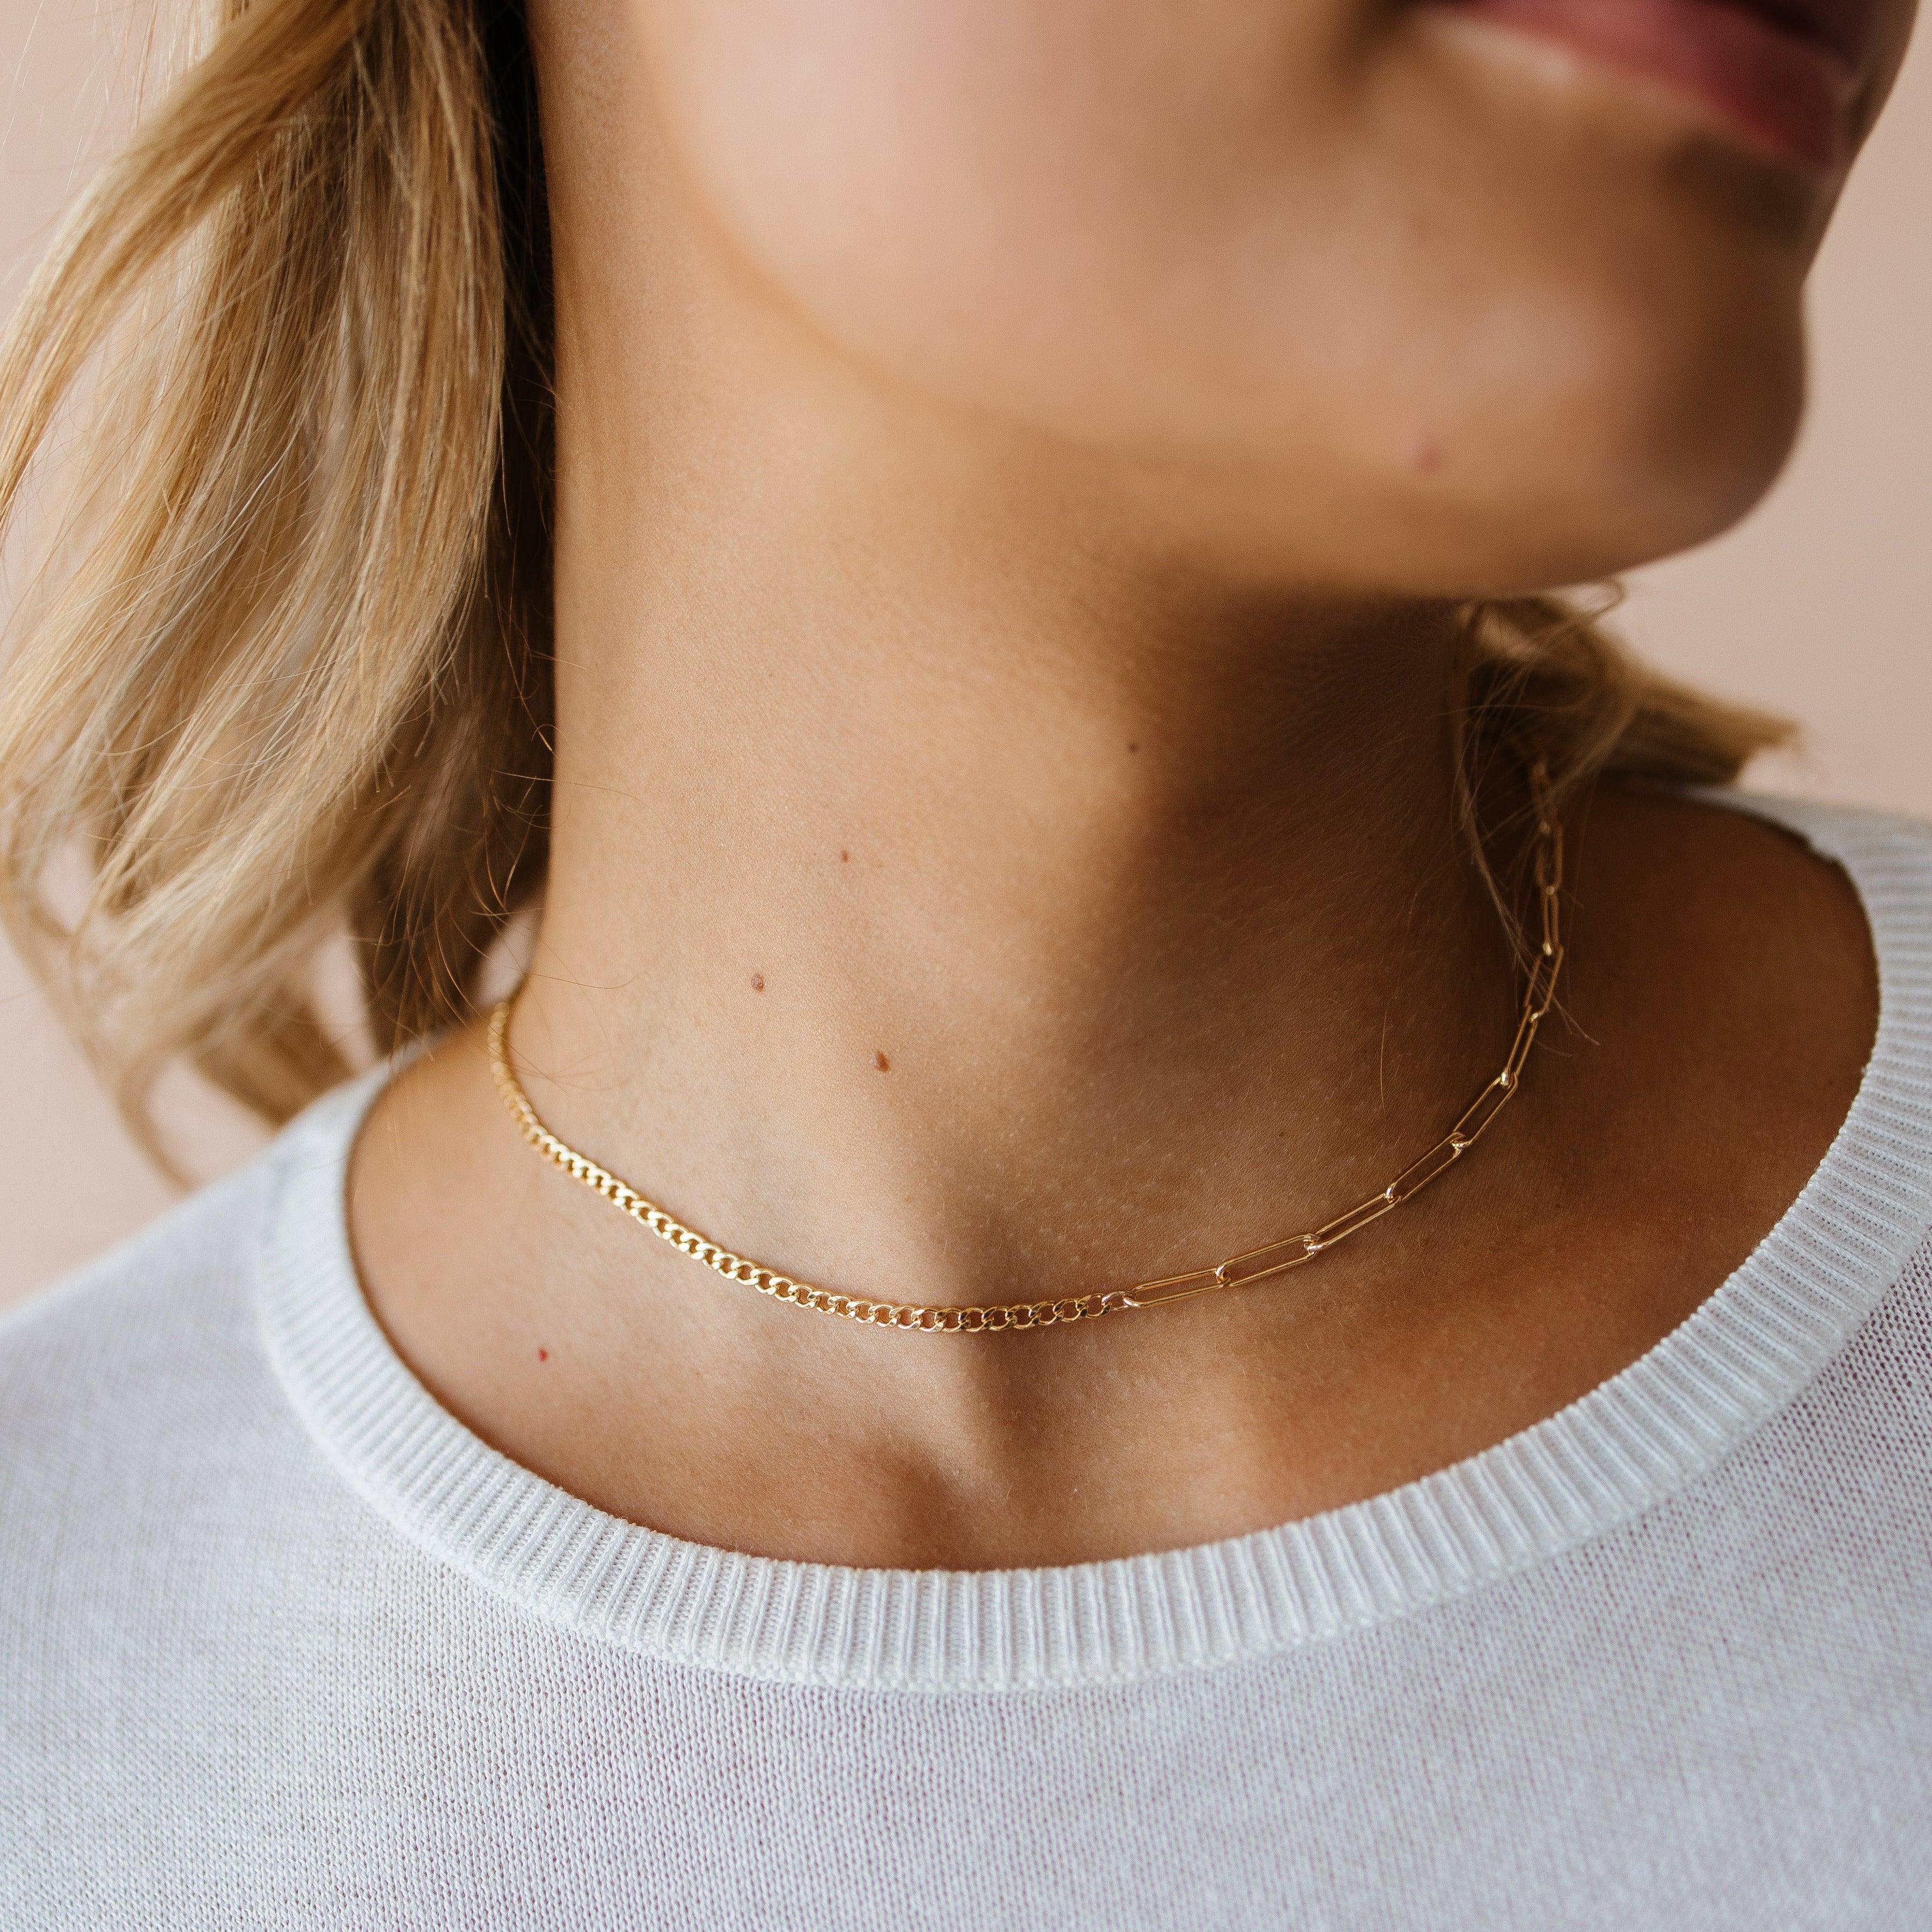 Kin Chain Necklace - Nolia Jewelry - Meaningful + Sustainably Handcrafted Jewelry